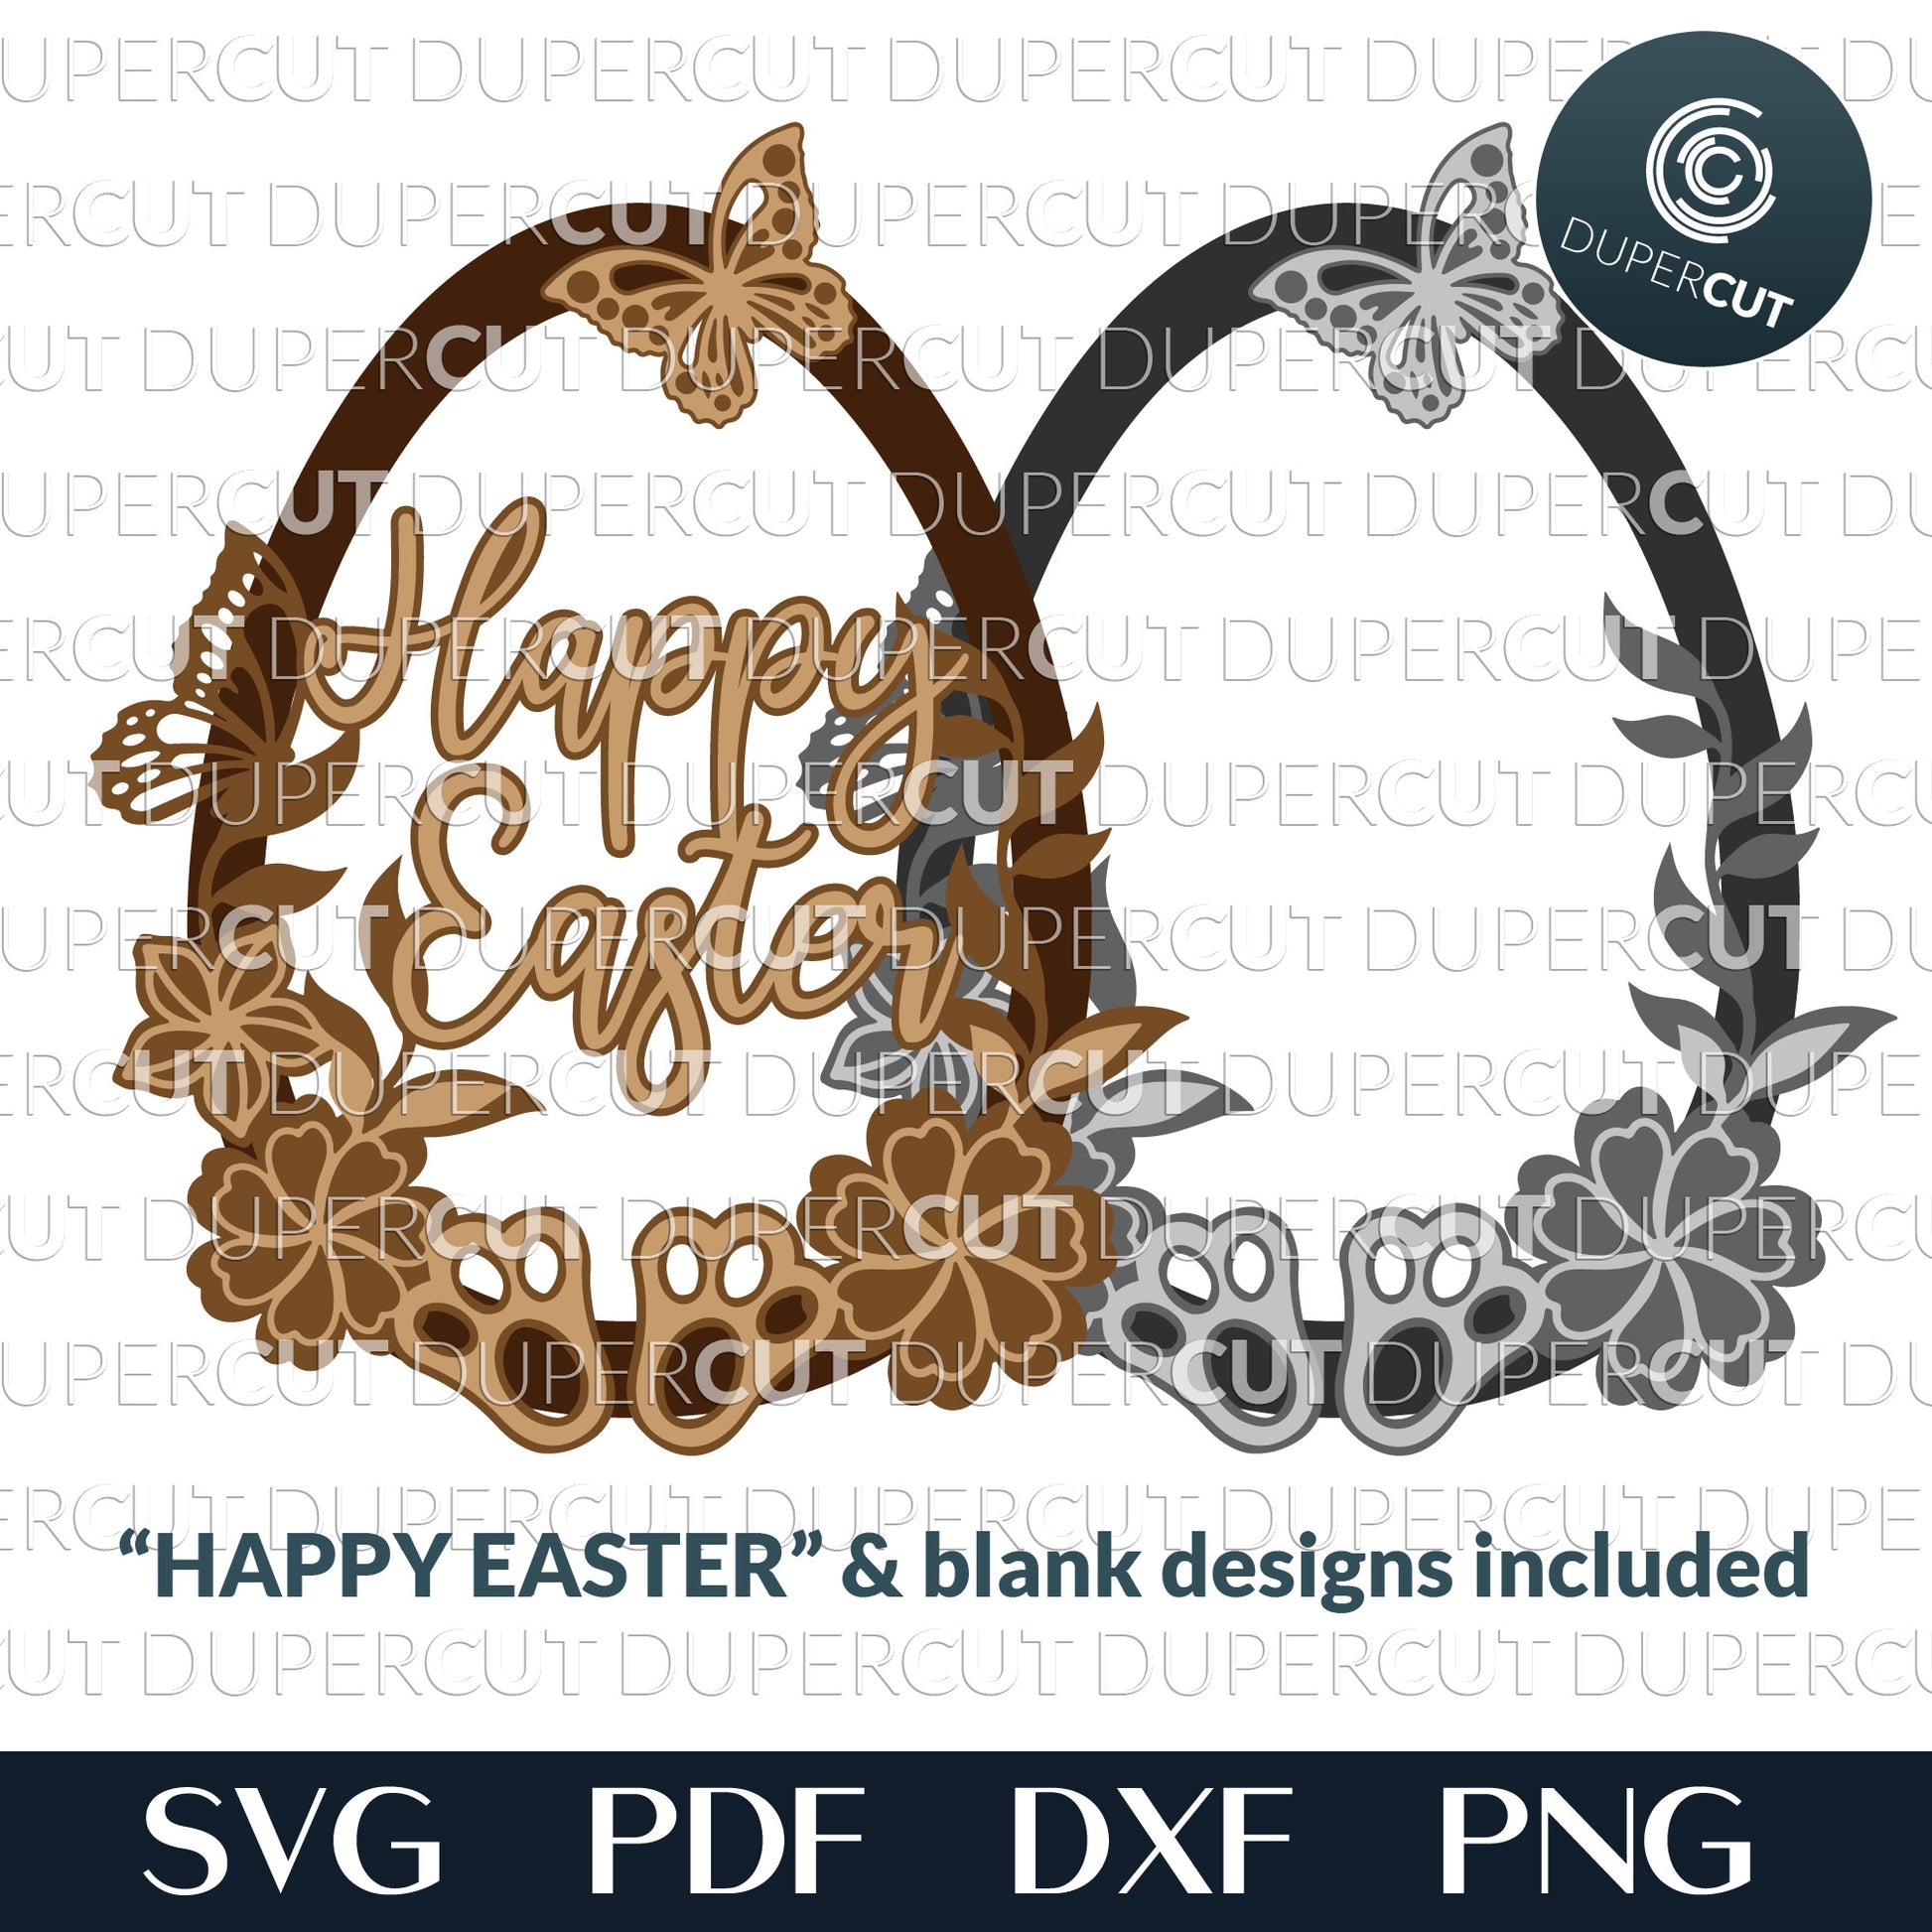 Easter egg with flowers and bunny feet - SVG PDF DXF layered cutting files for Cricut, Silhouette Cameo, Glowforge laser, CNC plasma machines